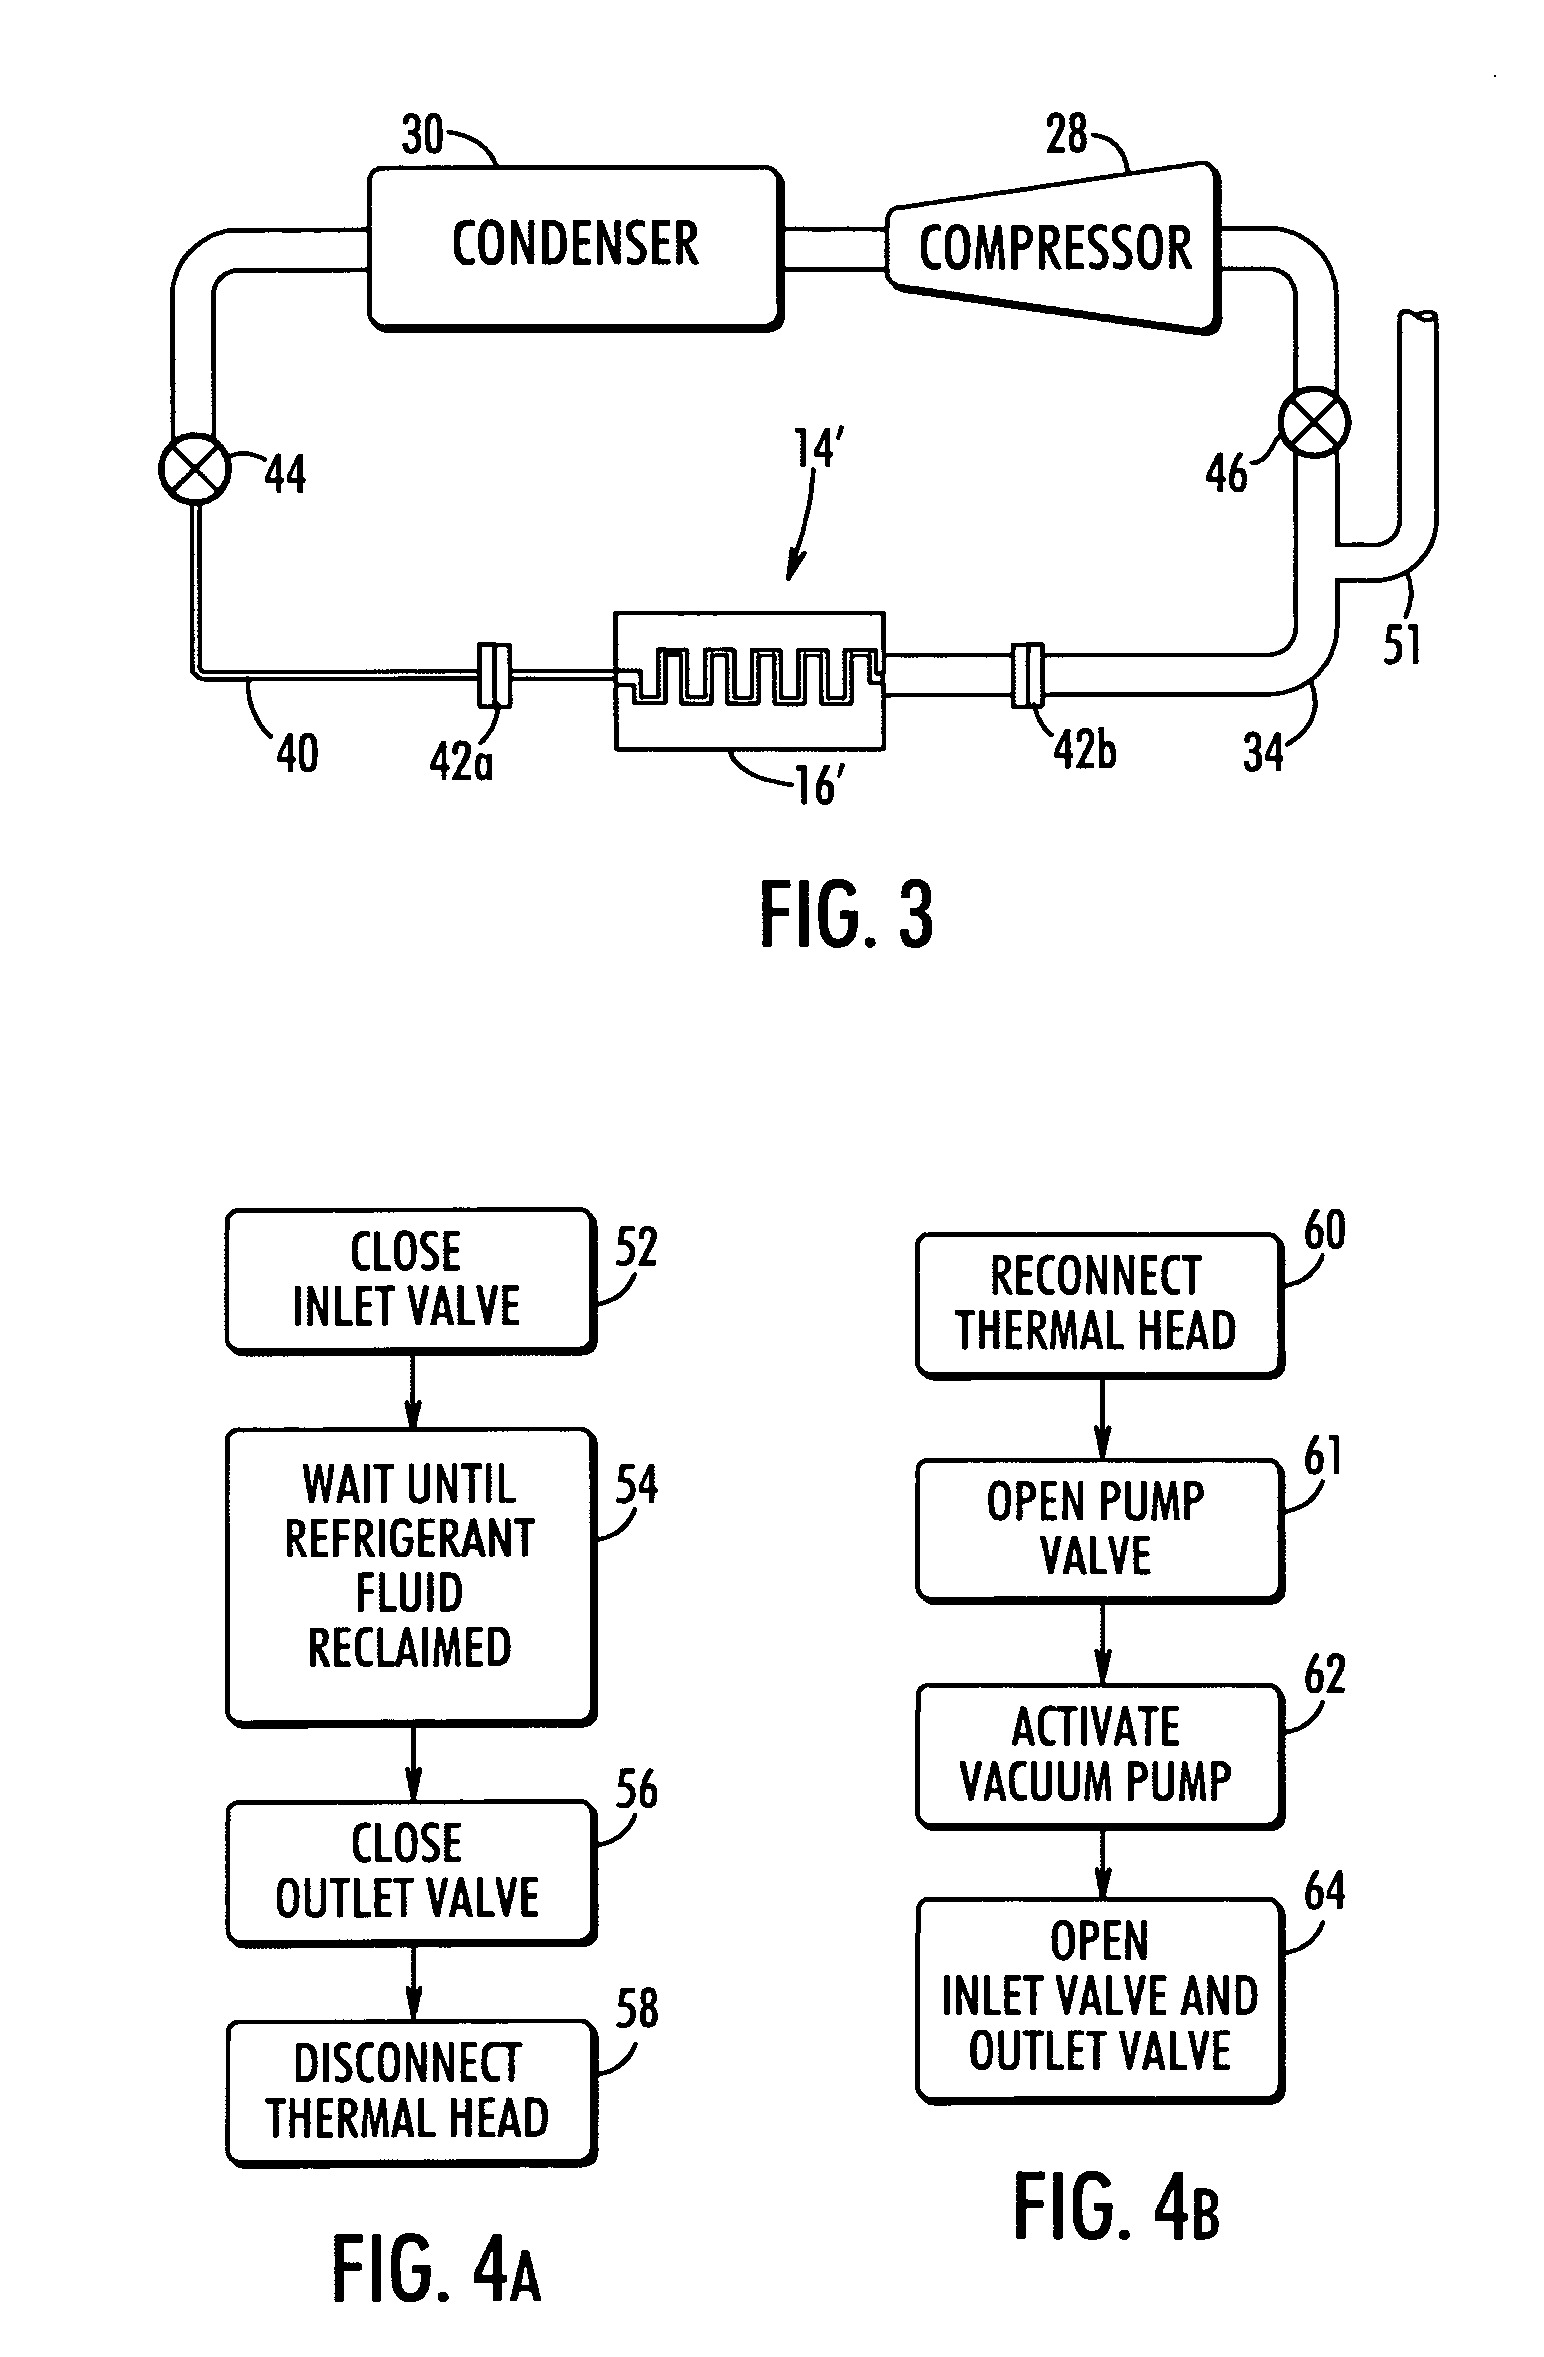 Apparatus and method for controlling the temperature of an electronic device